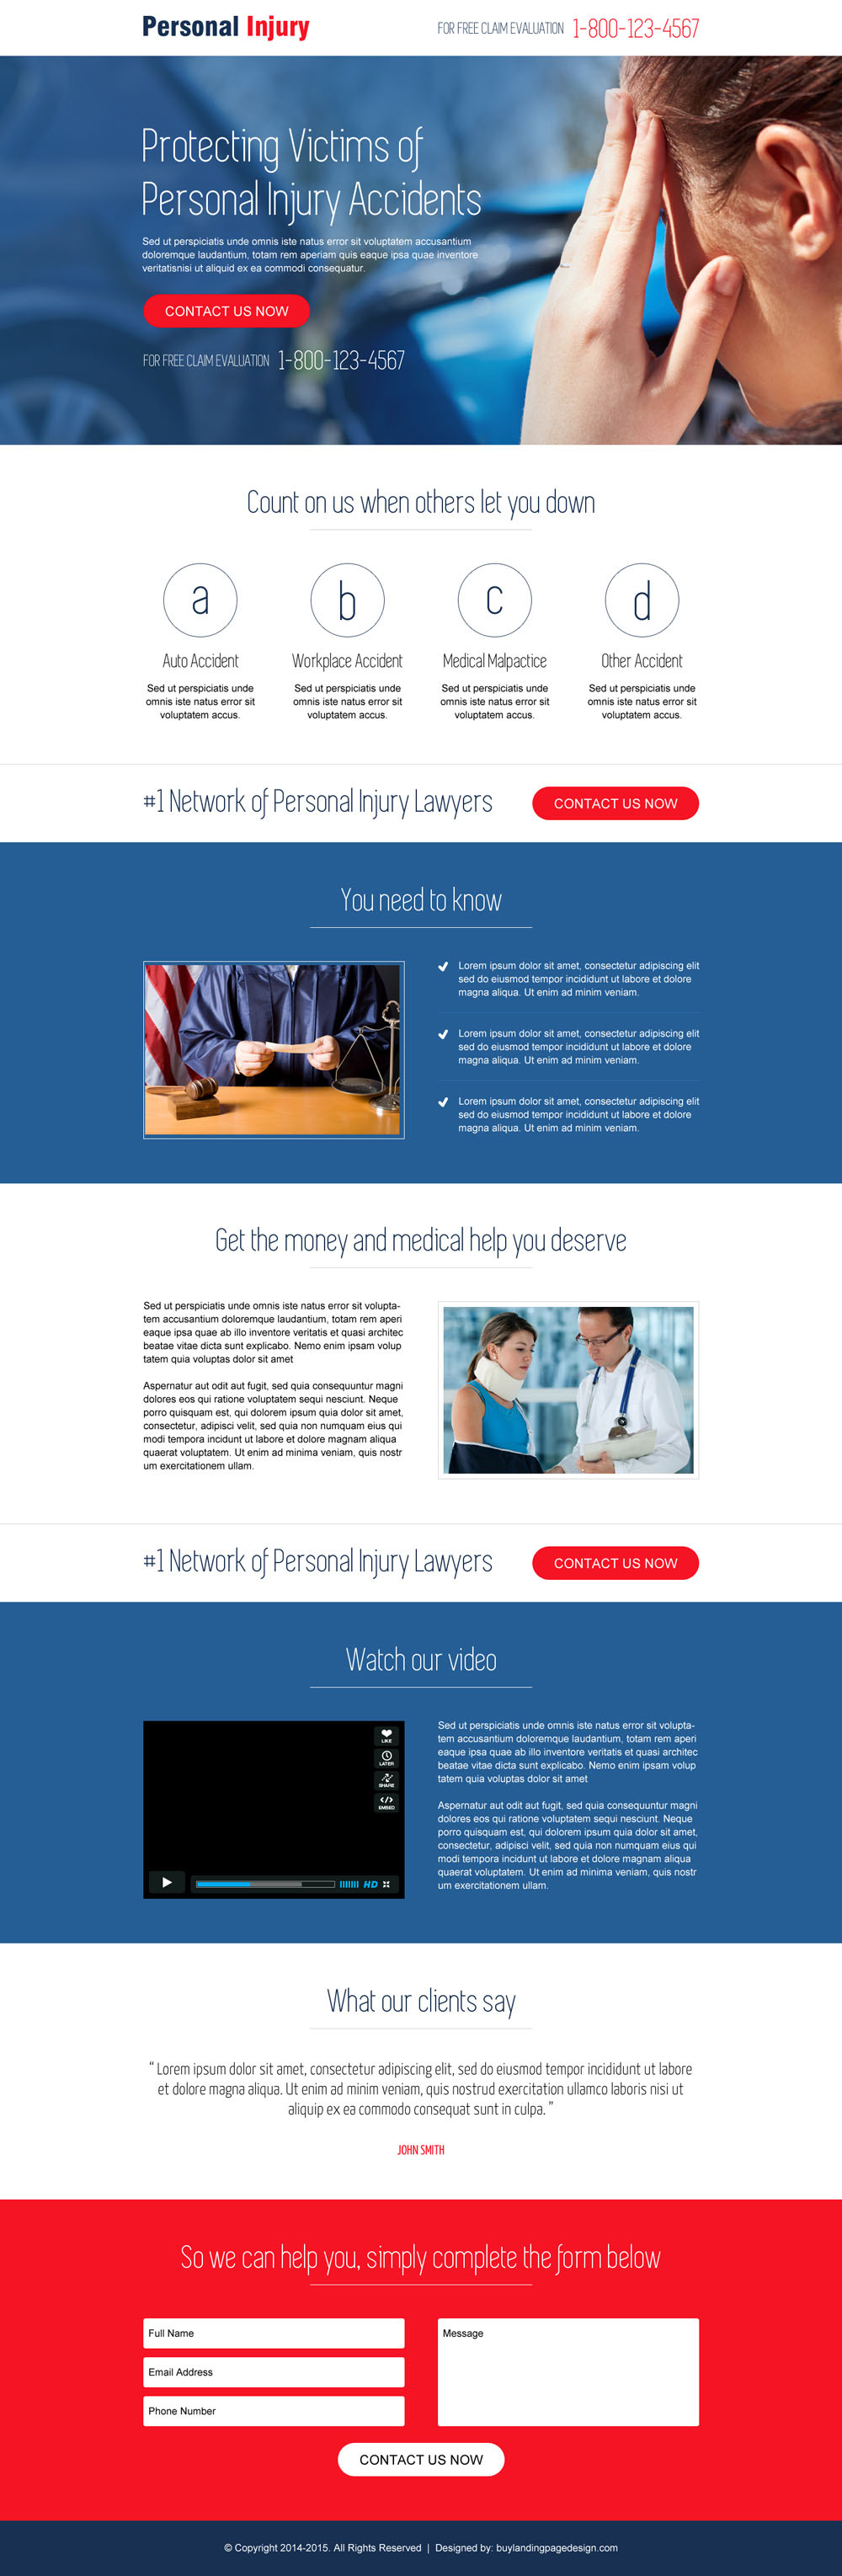 personal-injury-lead-capture-and-call-to-action-responsive-landing-page-design-template-001